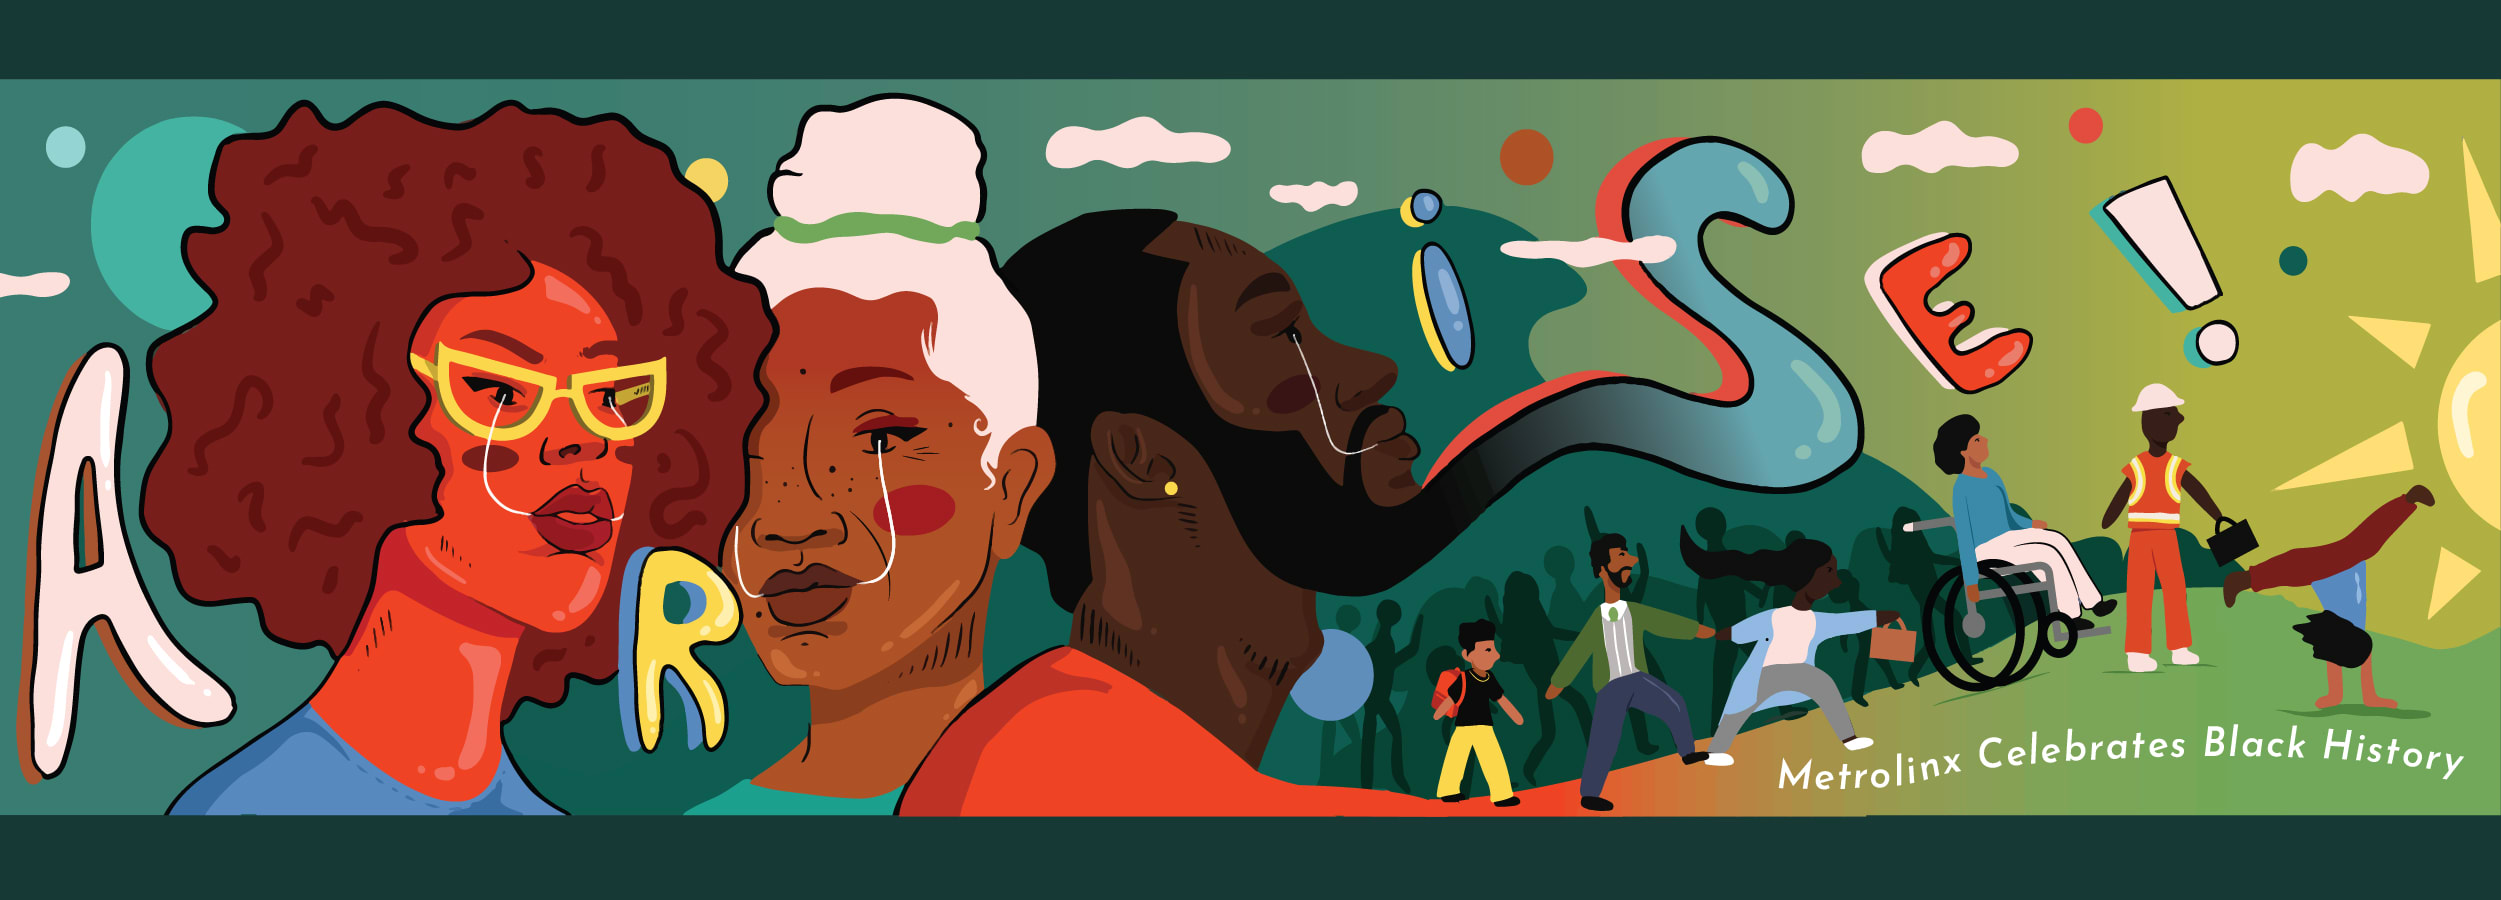 Illustrated artwork by Alexis Ake to celebrate Black History Month.